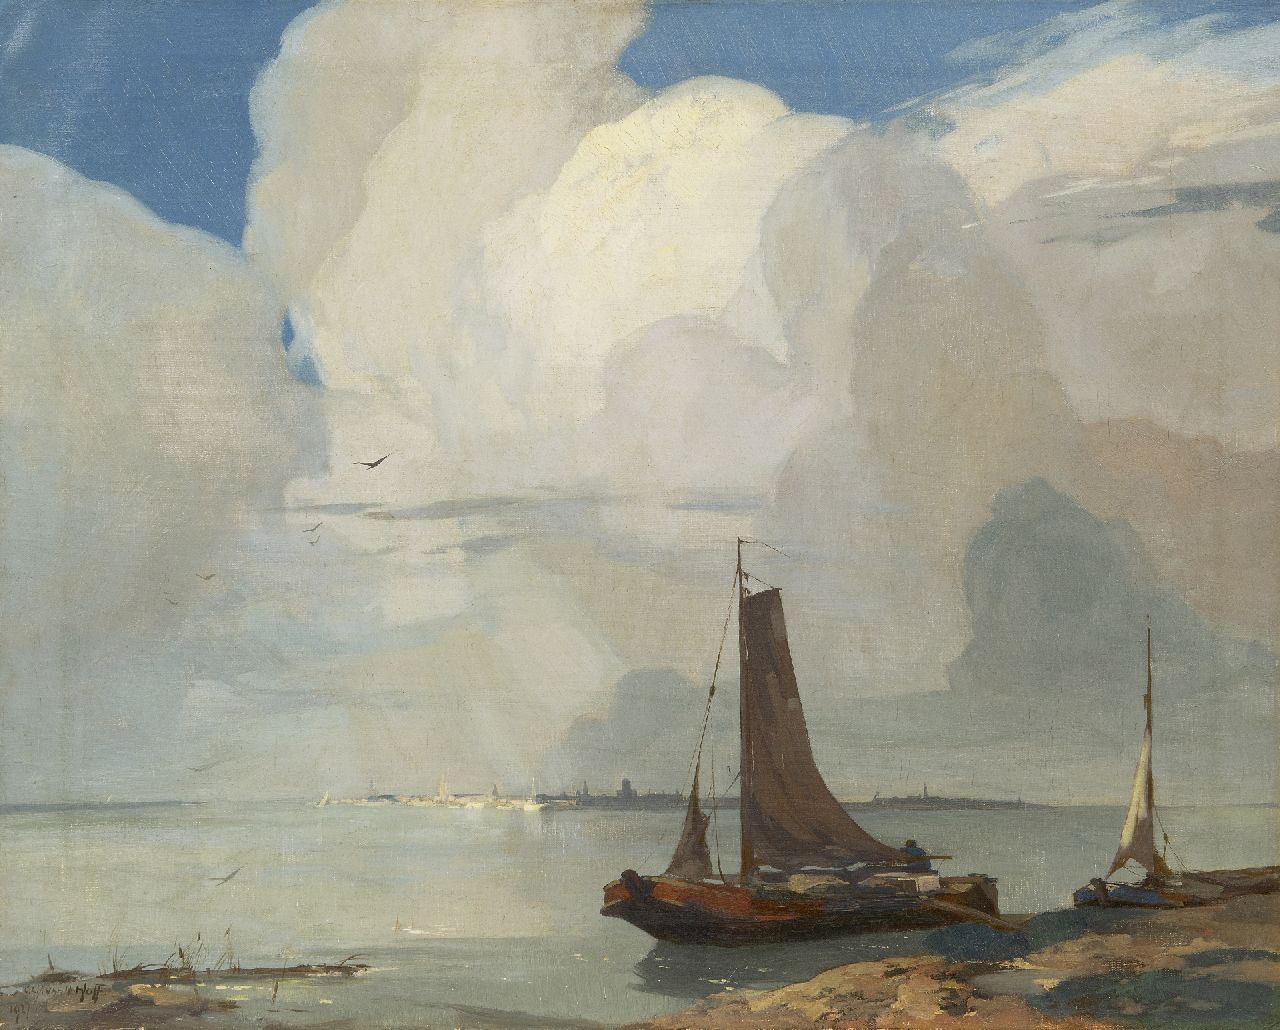 Hoff A.J. van 't | Adrianus Johannes 'Adriaan' van 't Hoff | Paintings offered for sale | Fishing boats on the waterfront, a city in the distance, oil on canvas 60.2 x 75.5 cm, signed l.l. and dated 1927